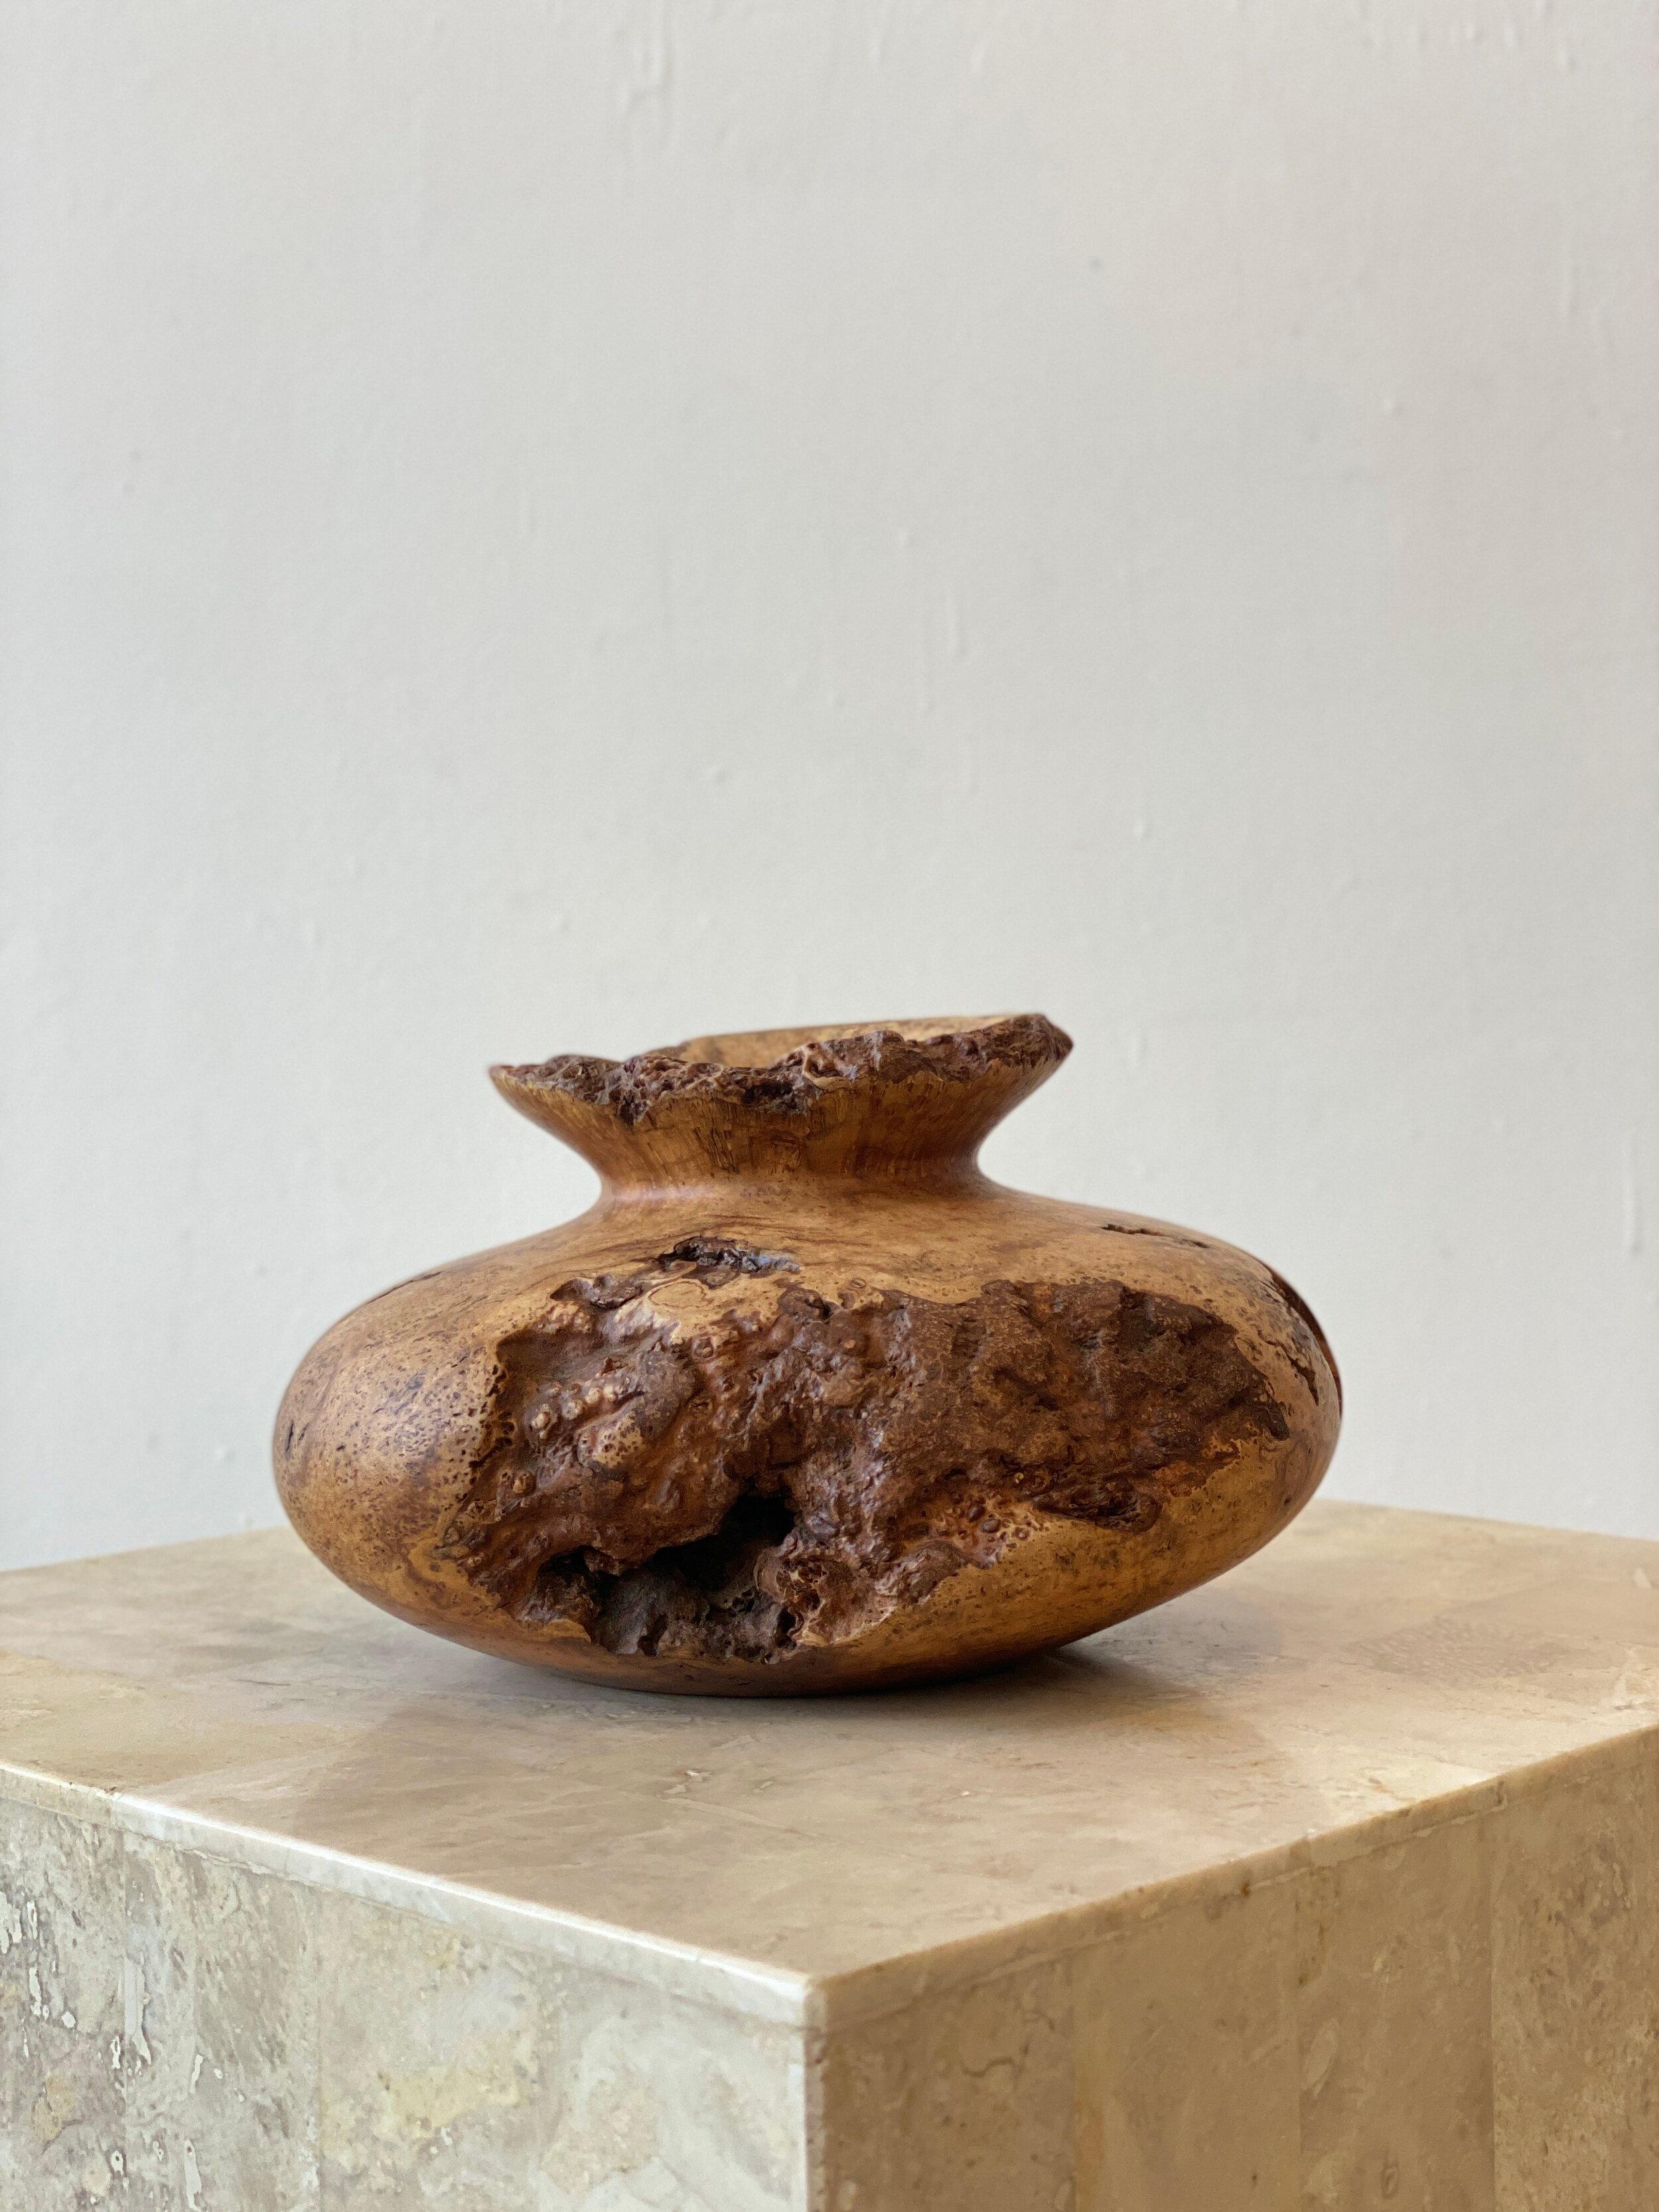 An exquisite sculptural wood vase of turned cherry burl by the late artist, Melvin Lindquist. He honed his Craft at home, exploring the IDEA of the vase through woodturning. A Craft perfected over a 50 year timespan. He was one of the main founding